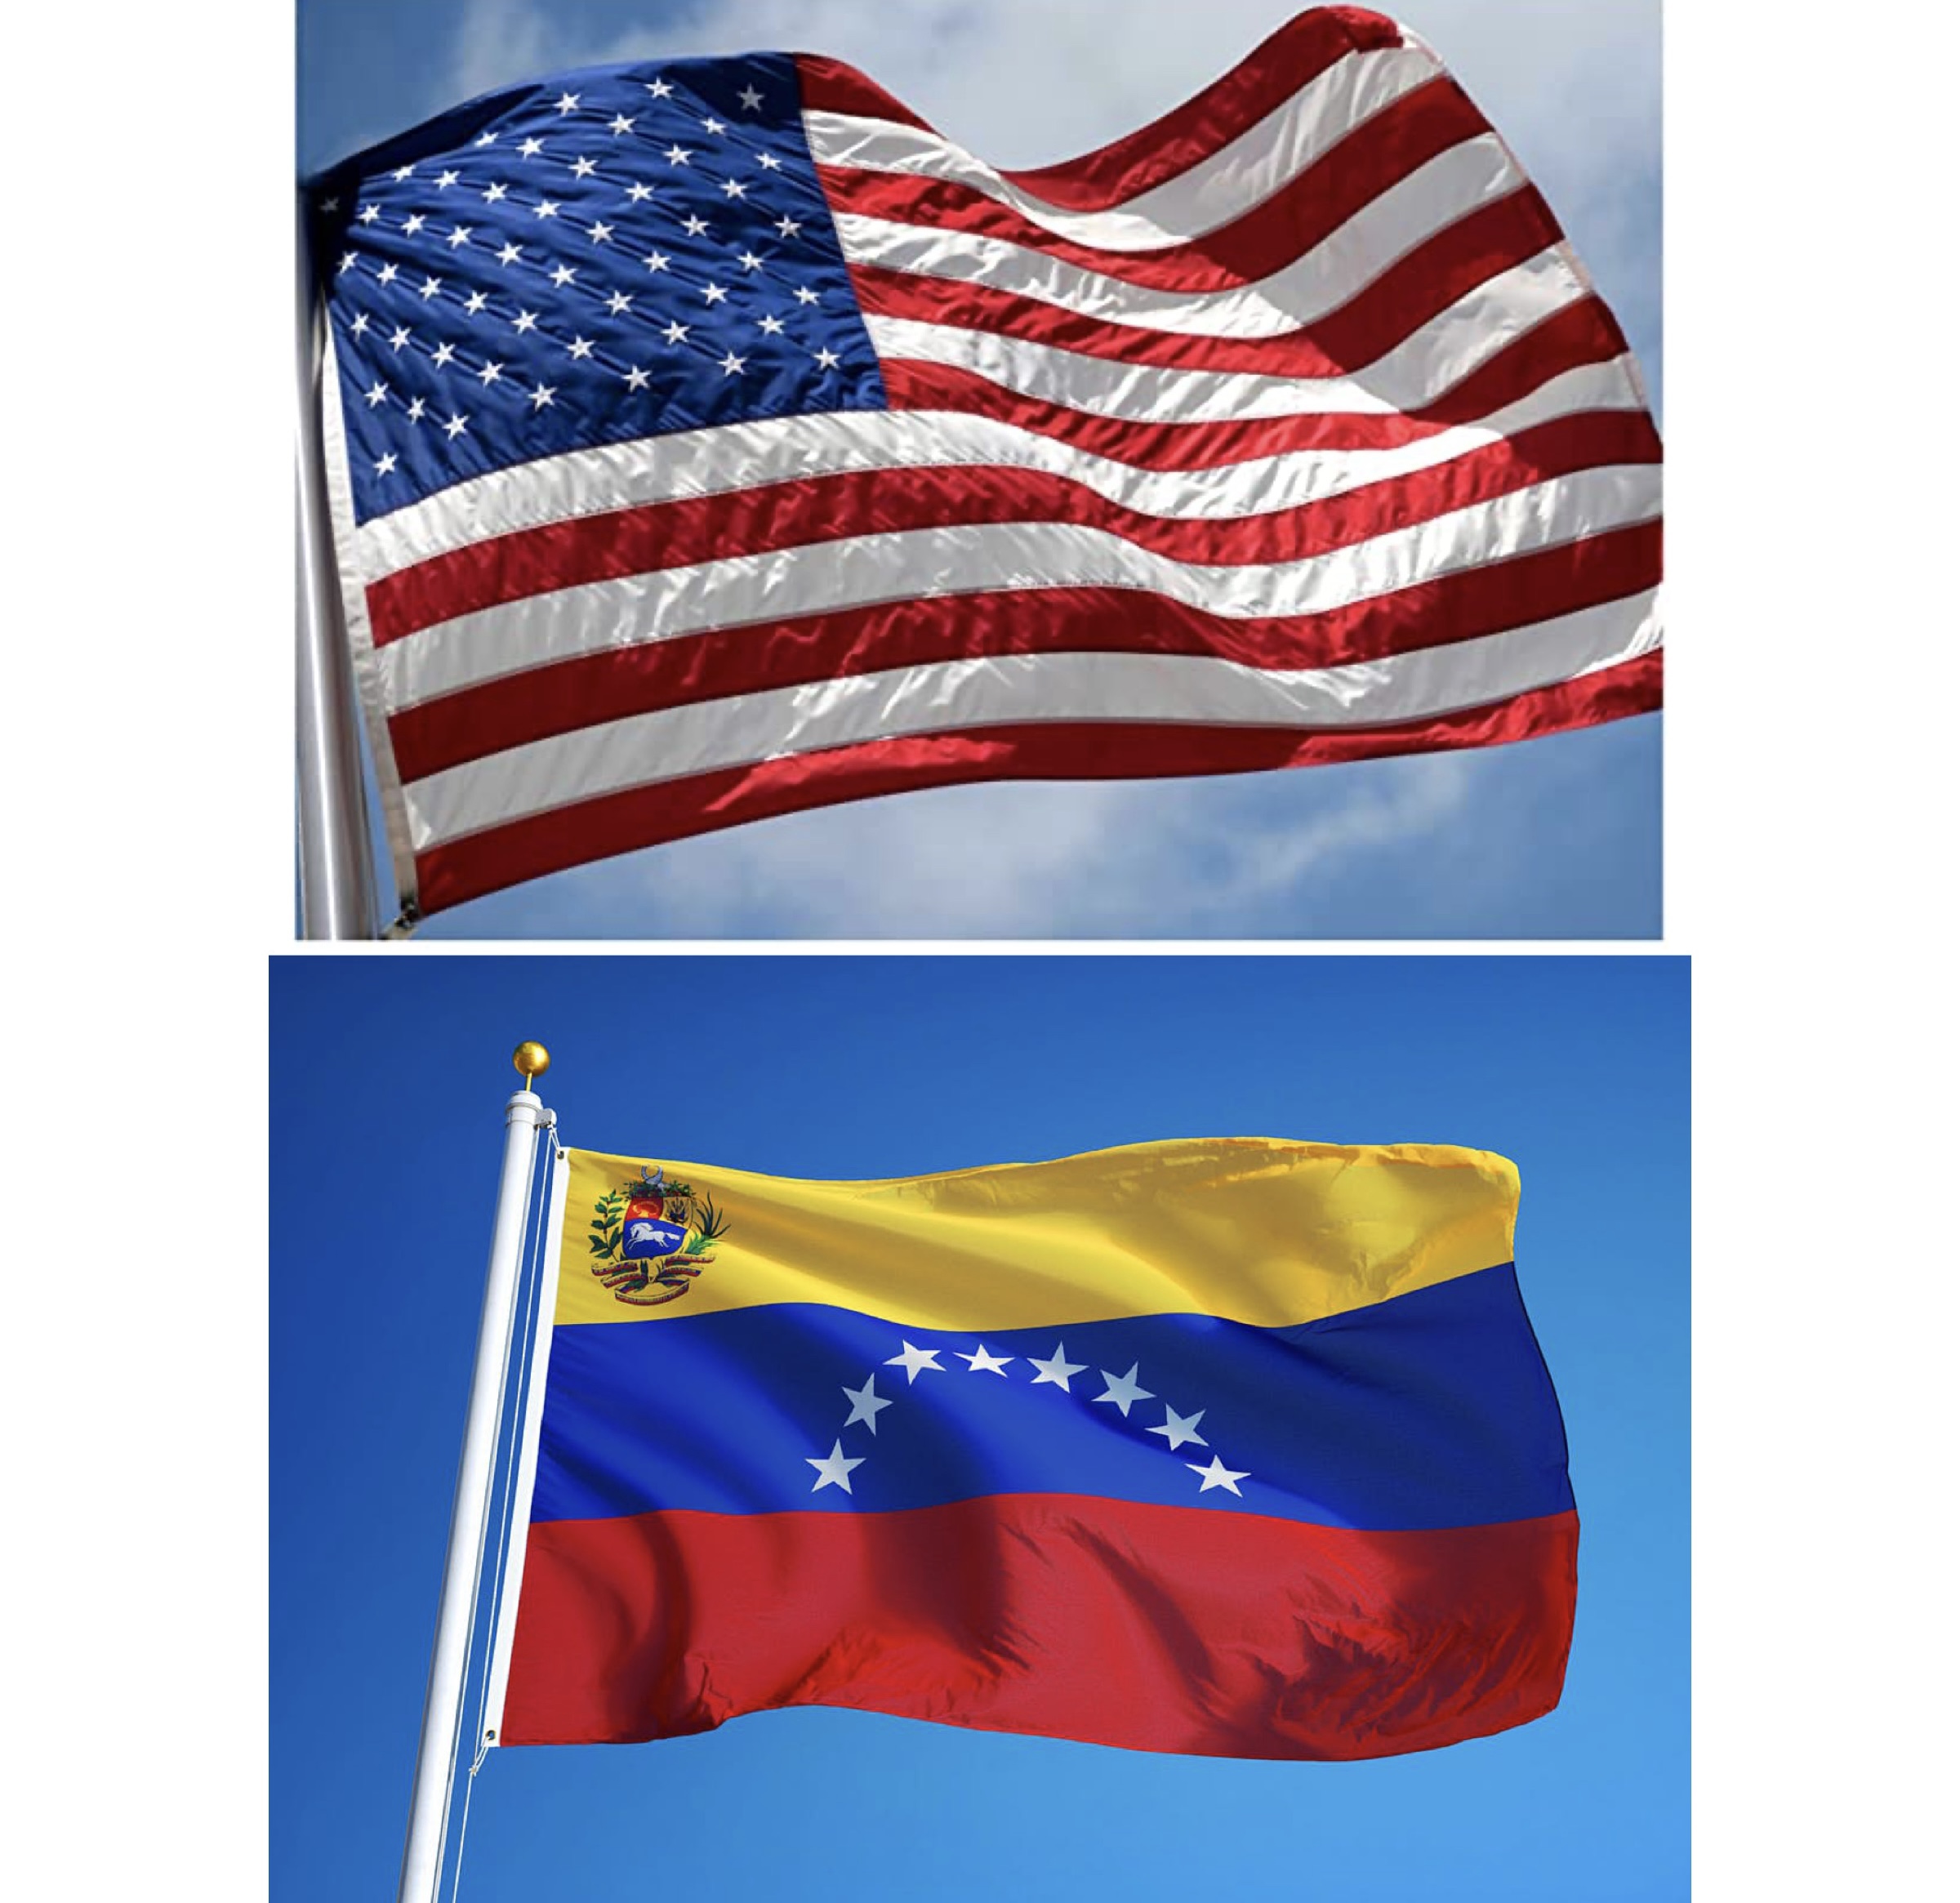 The United States and Venezuela’s ever-evolving relationship